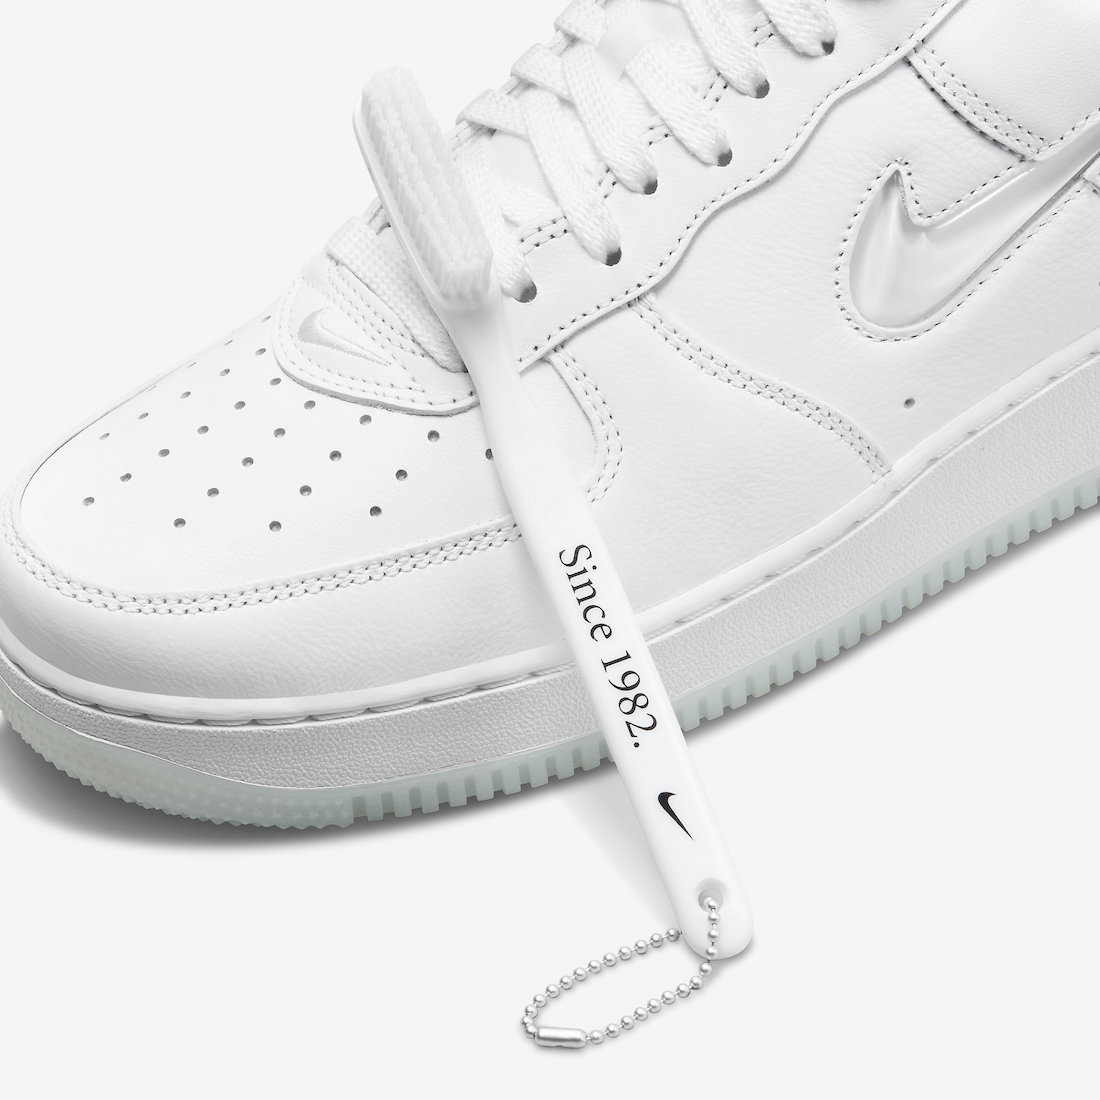 Nike Air Force 1 Low White Jewel FN5924-100 Release Date Toothbrush